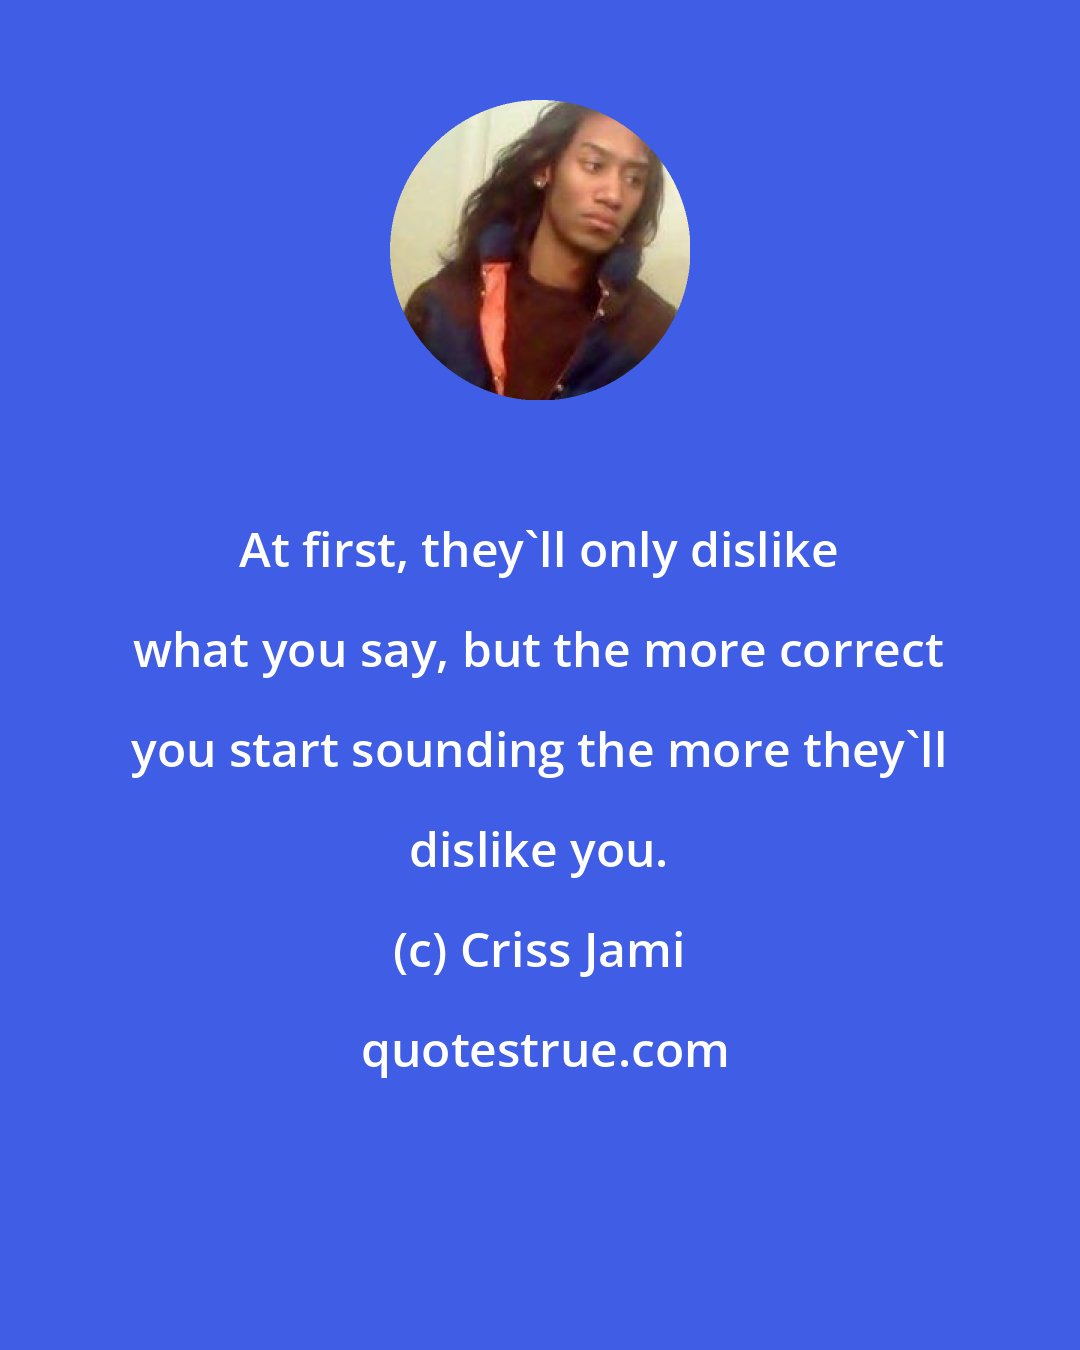 Criss Jami: At first, they'll only dislike what you say, but the more correct you start sounding the more they'll dislike you.